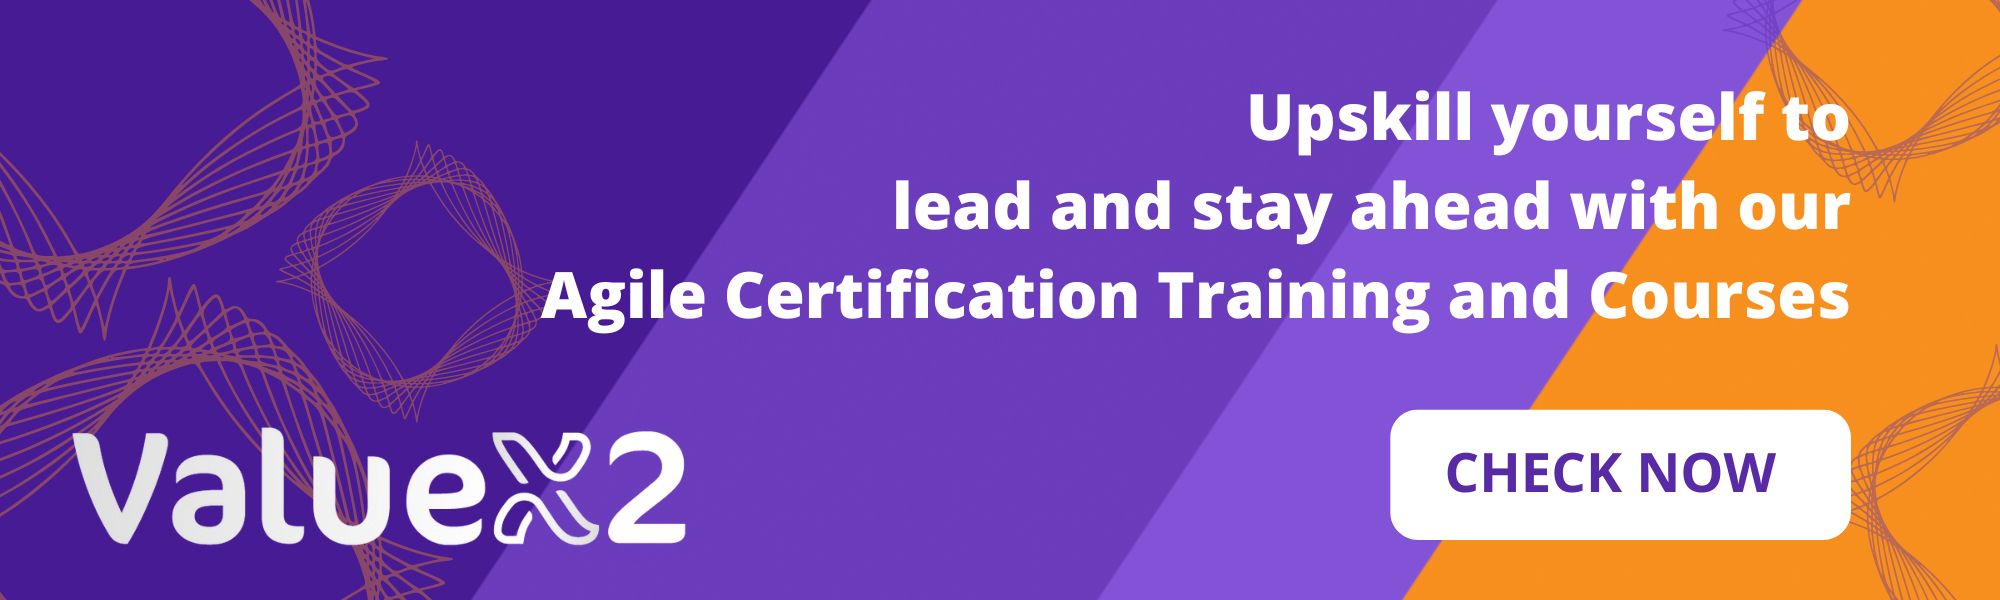 Valuex2 lean-agile frameworks certification training and courses